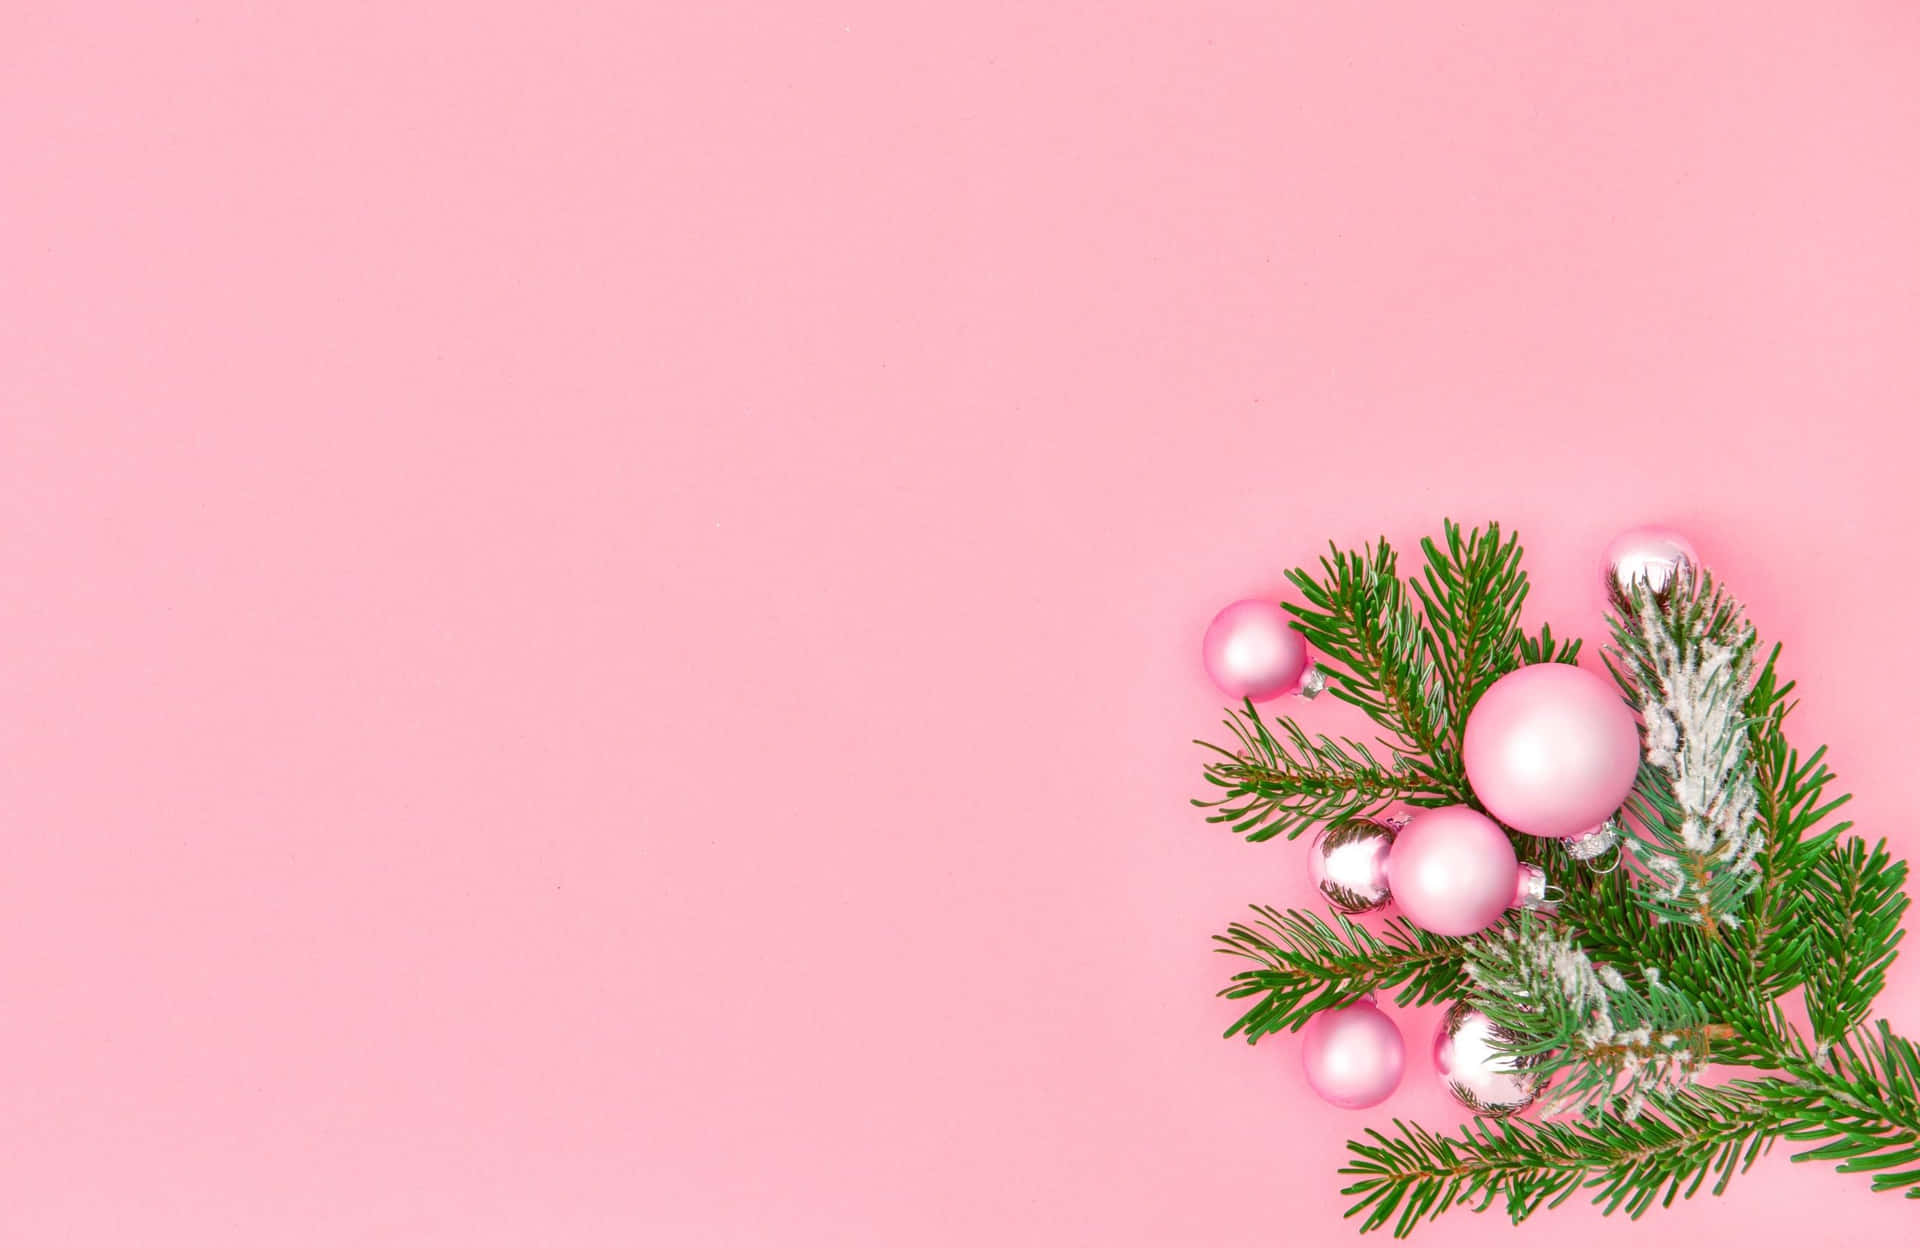 A festive pink Christmas background